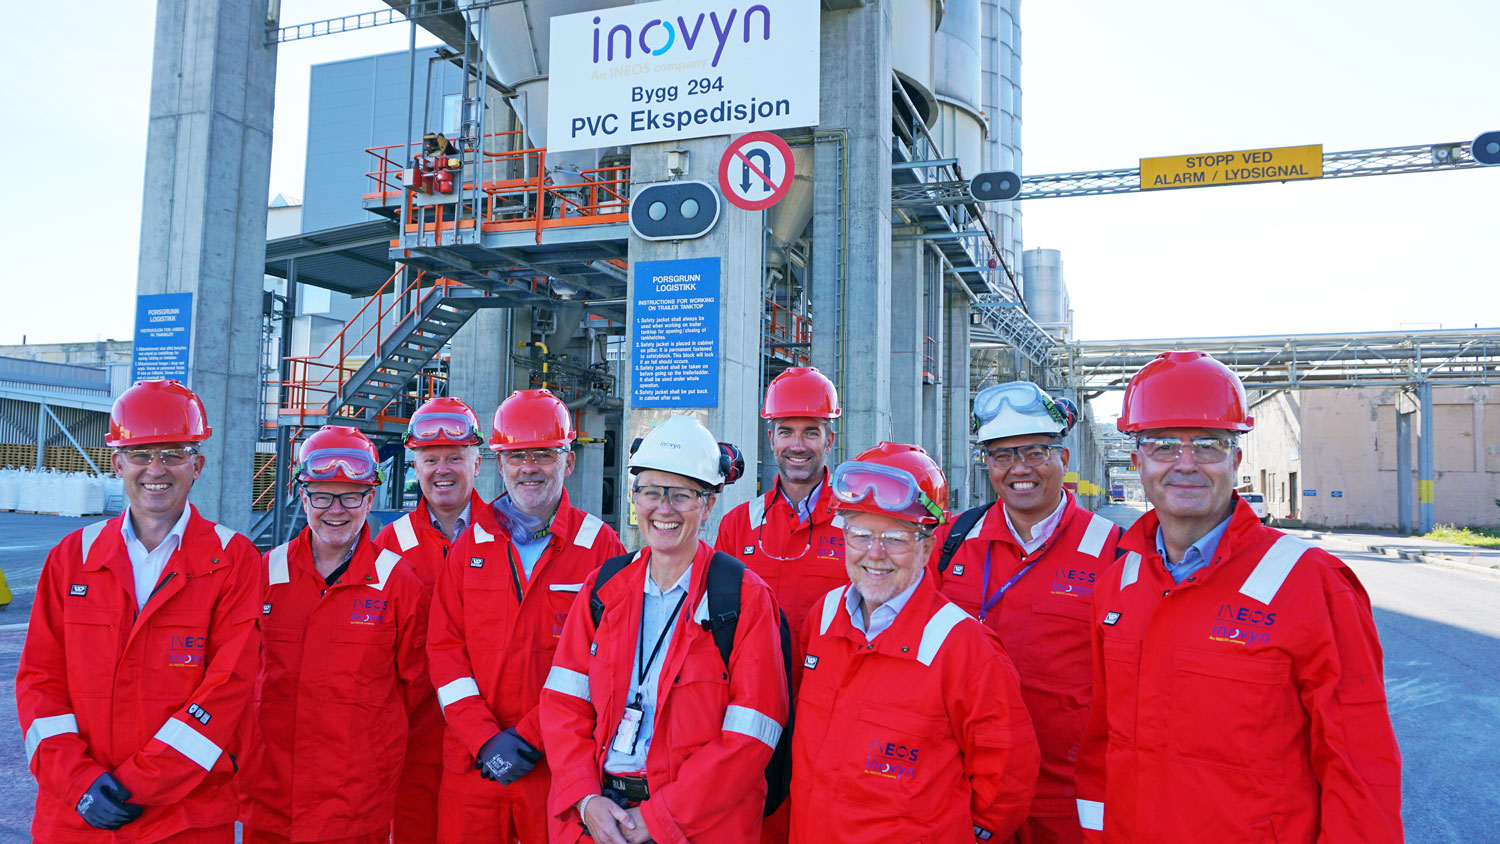 group photo of the Inovyn Group's management team, all dressed in red coats and red helmets.